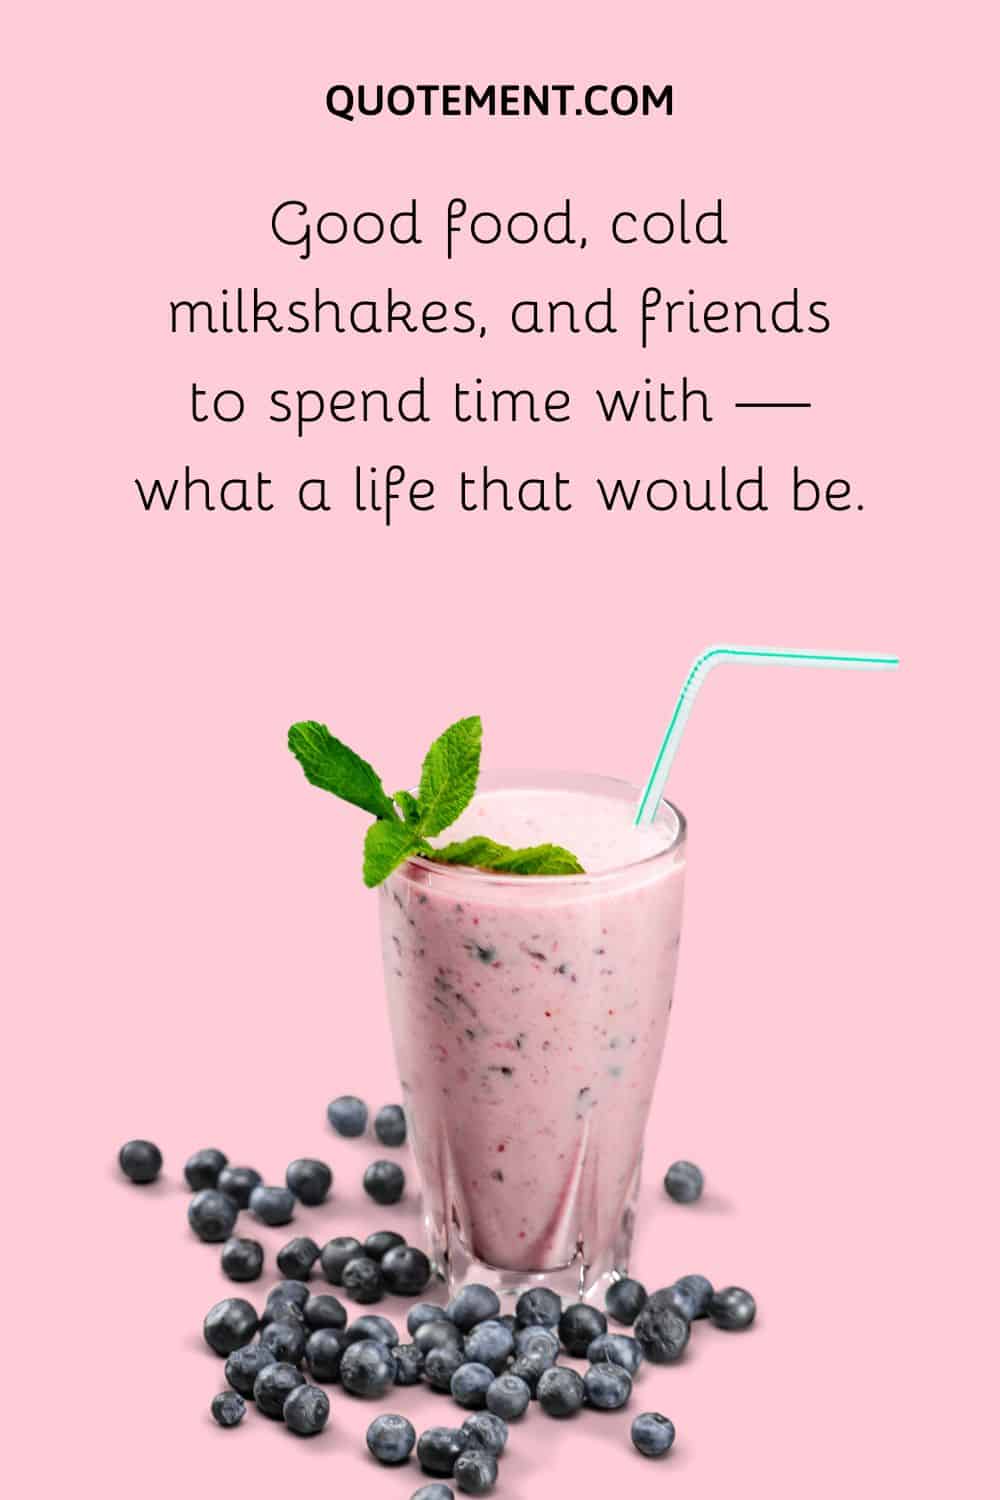 Good food, cold milkshakes, and friends to spend time with — what a life that would be.